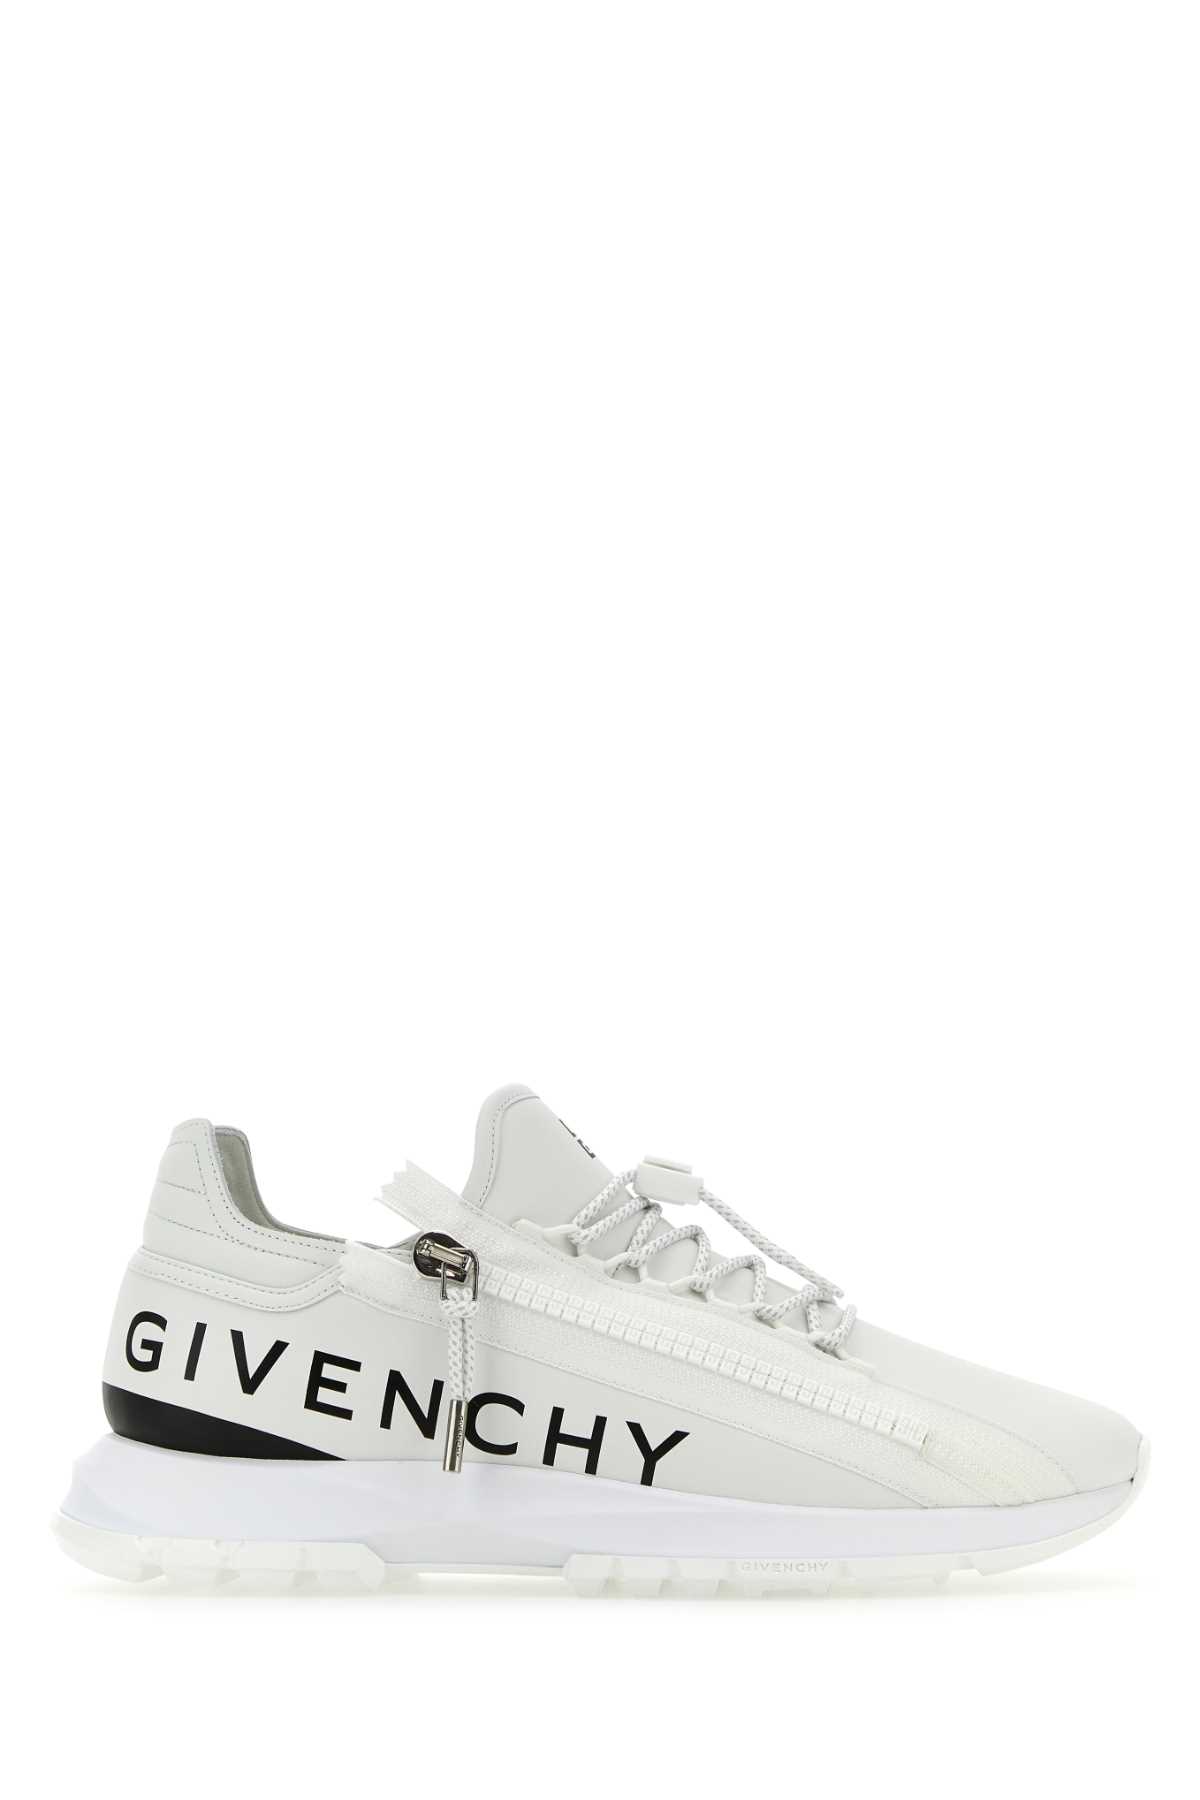 Shop Givenchy White Leather Spectre Sneakers